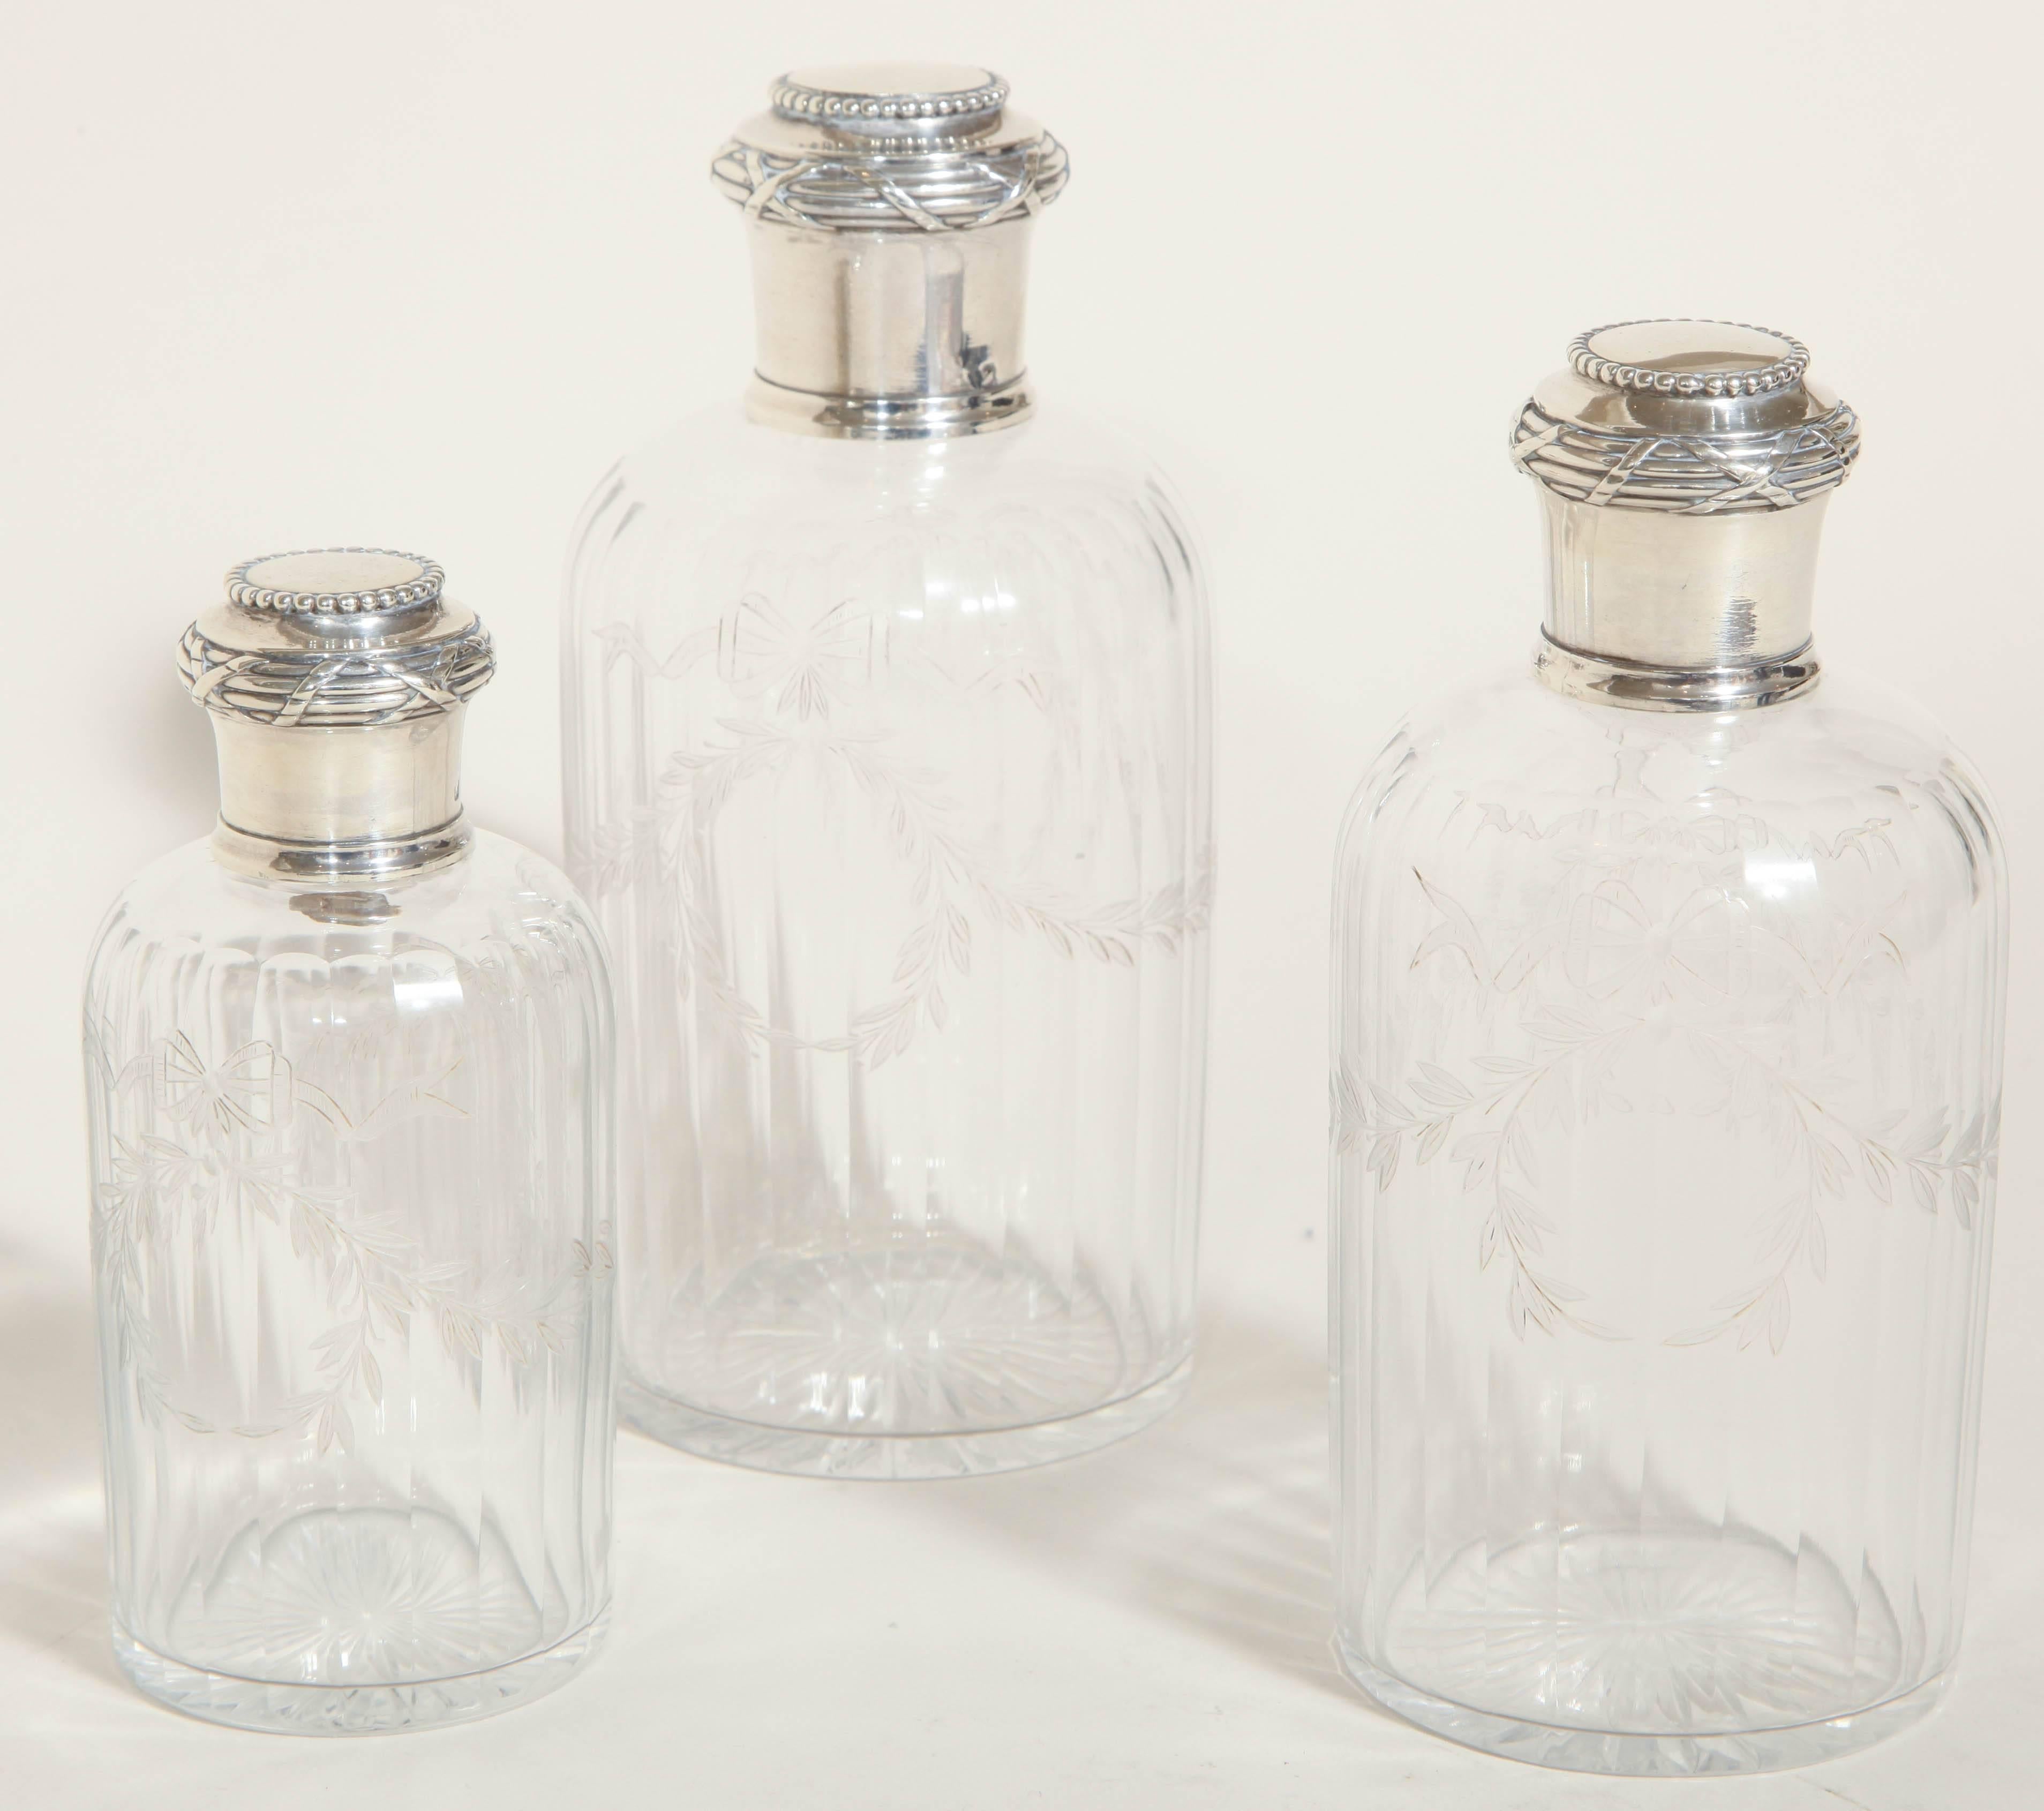 Boin Taburet French Art Deco Set of 3 Sterling Silver & Glass Scent Bottles In Excellent Condition For Sale In New York, NY